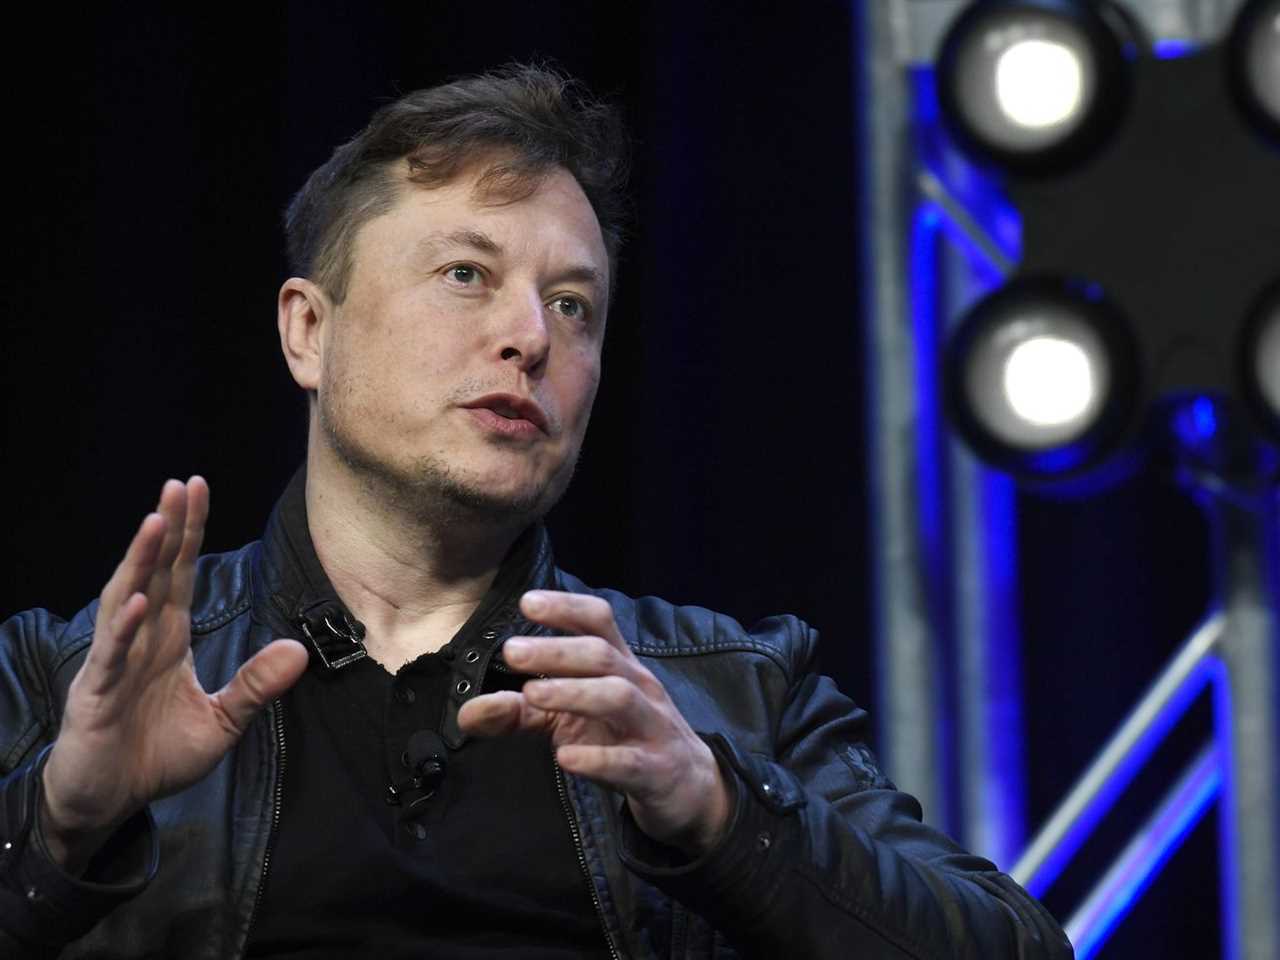 Musk speaking and gesturing with his hands.